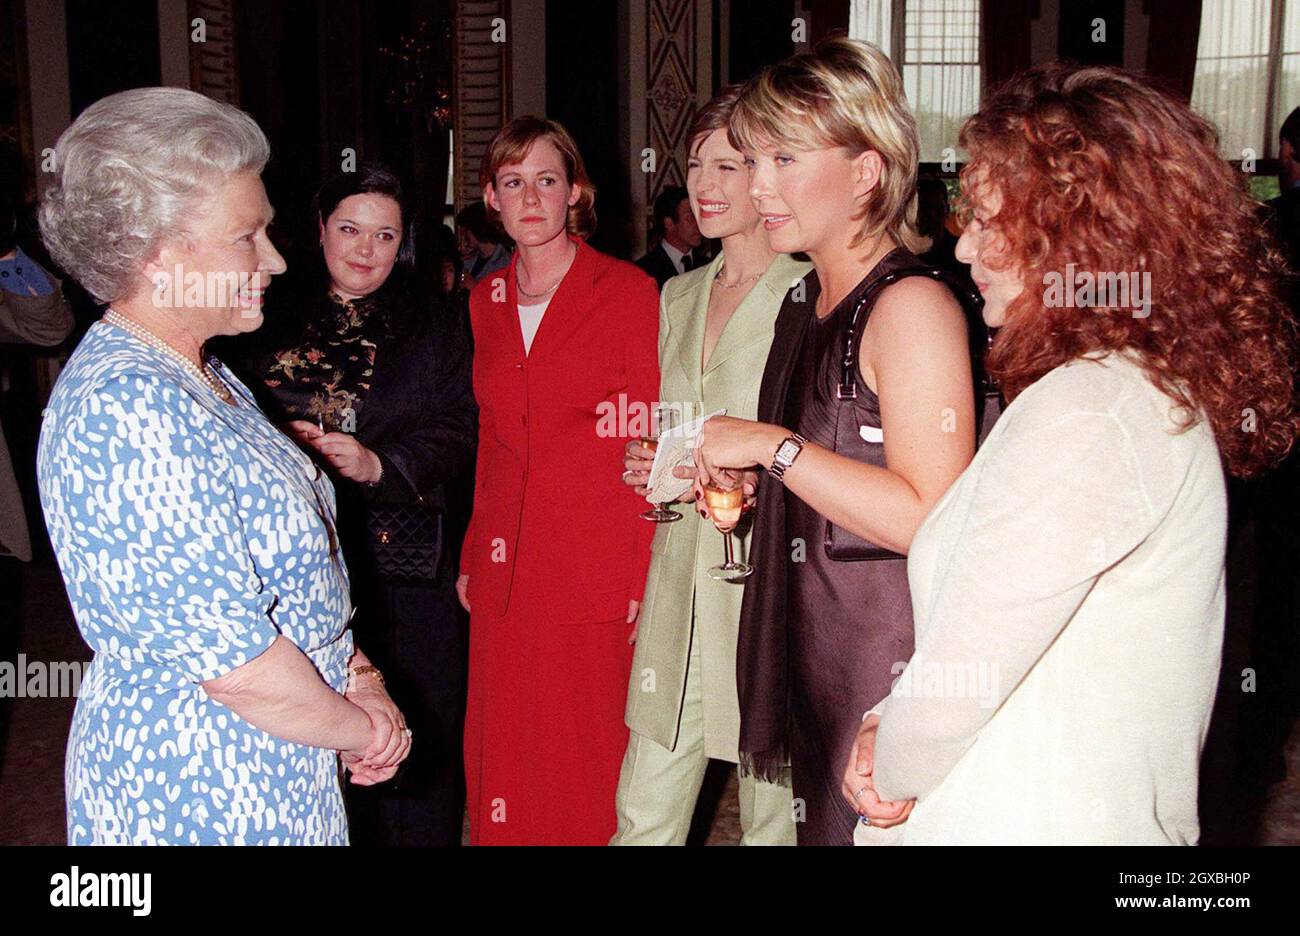 The Queen meets (l-r) Lisa Riley, actress from Emmerdale, Lindsay MacMaster, studying landmines at Warwick University,  Katie Derham, from ITN, Kirsty Young, presenter Channel 5, and actress Julia Sawalha at a reception at Buckingham Palave. Â©Anwar Hussein/allactiondigital.com  Stock Photo